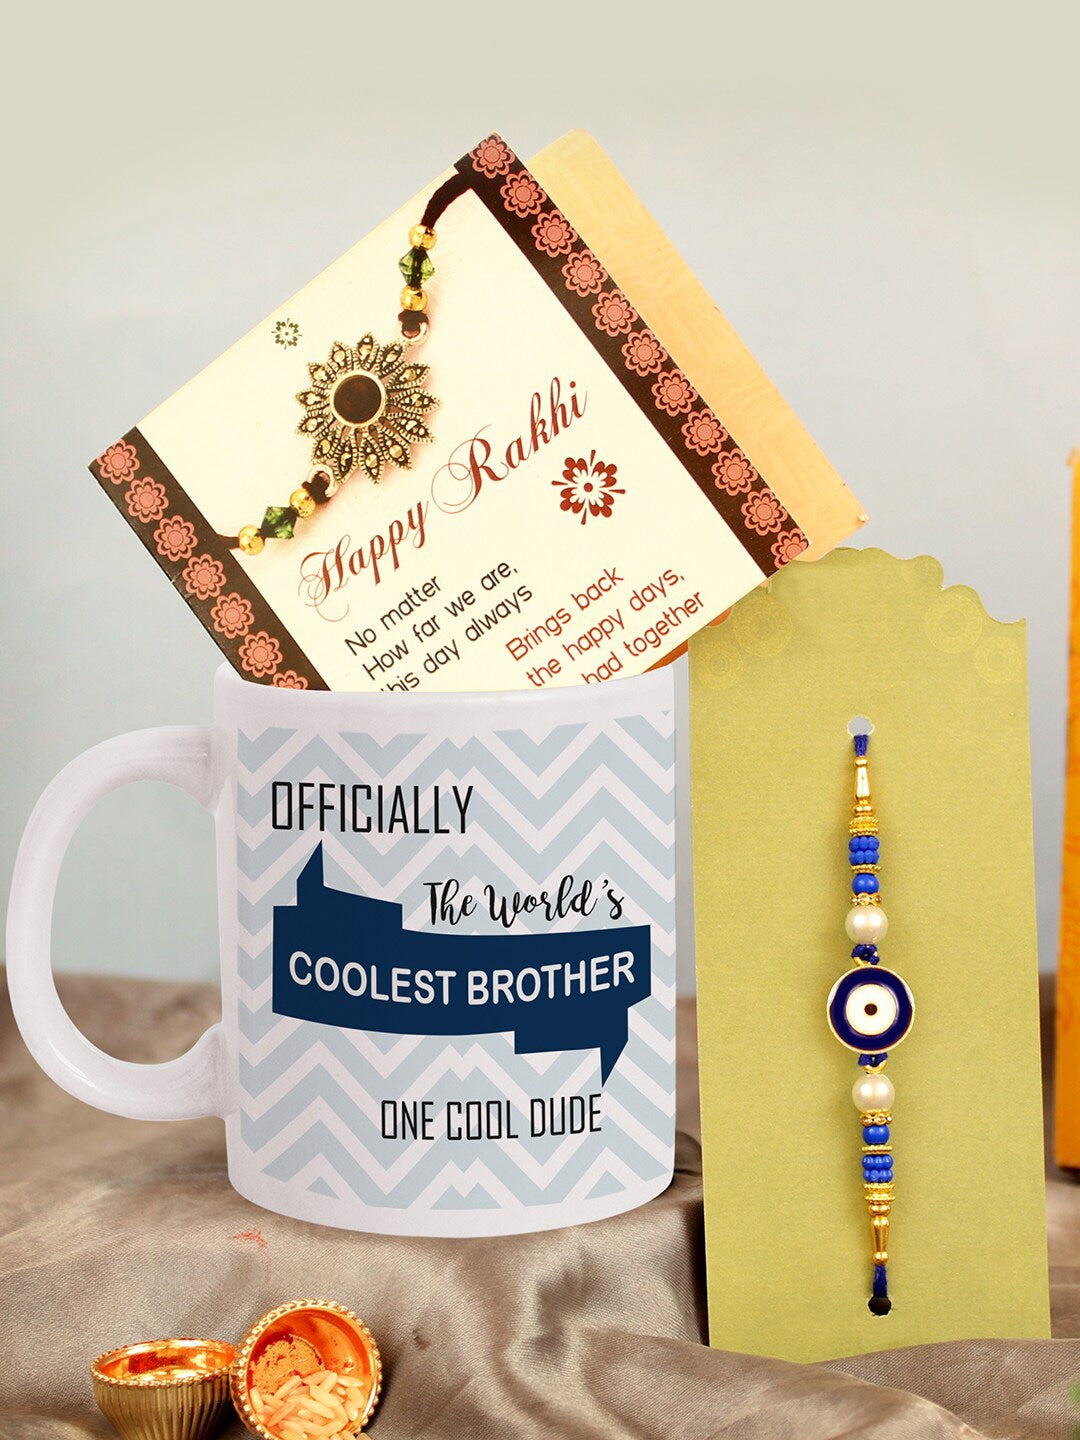 Buy Sky Trends Birthday Gift for Brother for Brother Raksha Bandhan Gift  for Bhai Raksha Bandhan Gift for Younger Brother, Elder Brother, Bro Rakhi  Gift for Brother/Raksha Bandhan Gift for Brother Online